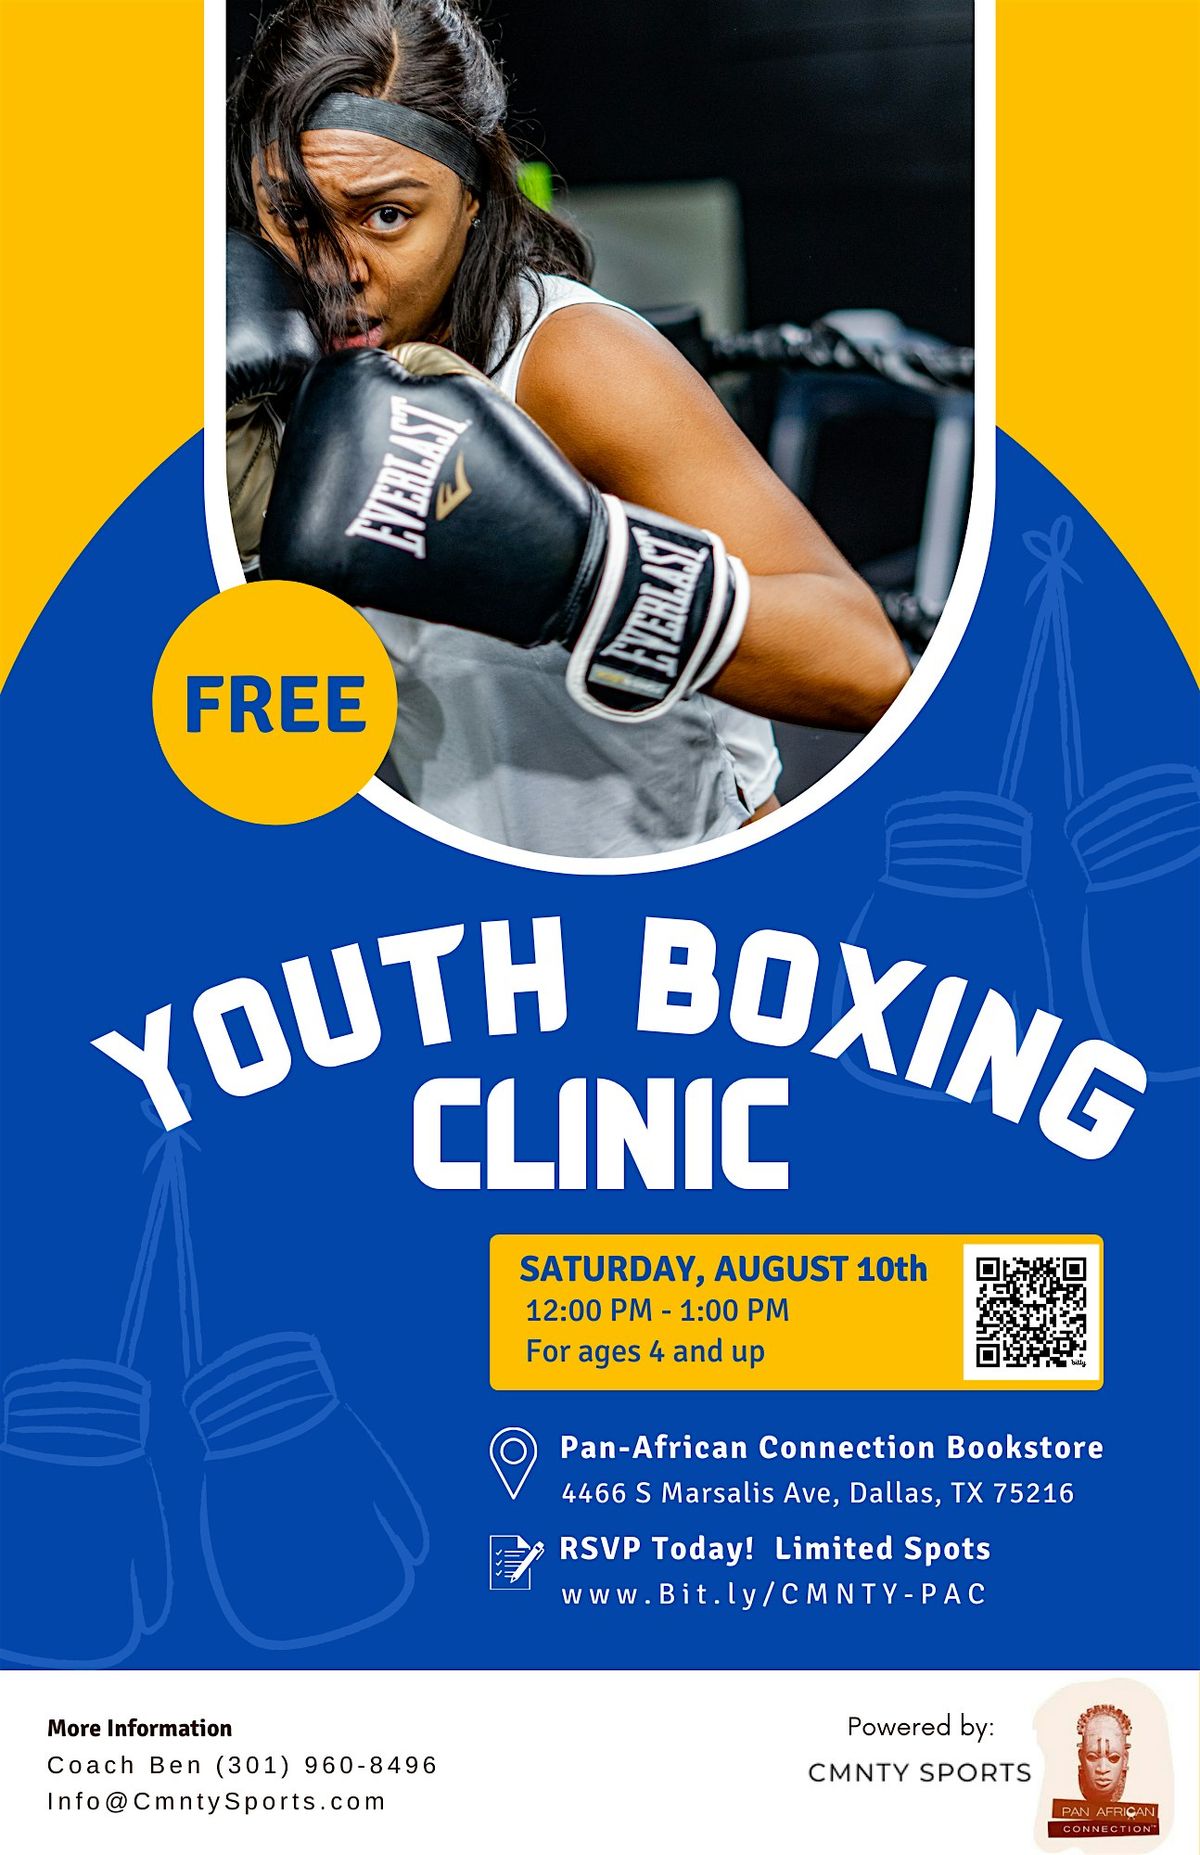 Free Youth Boxing Clinic